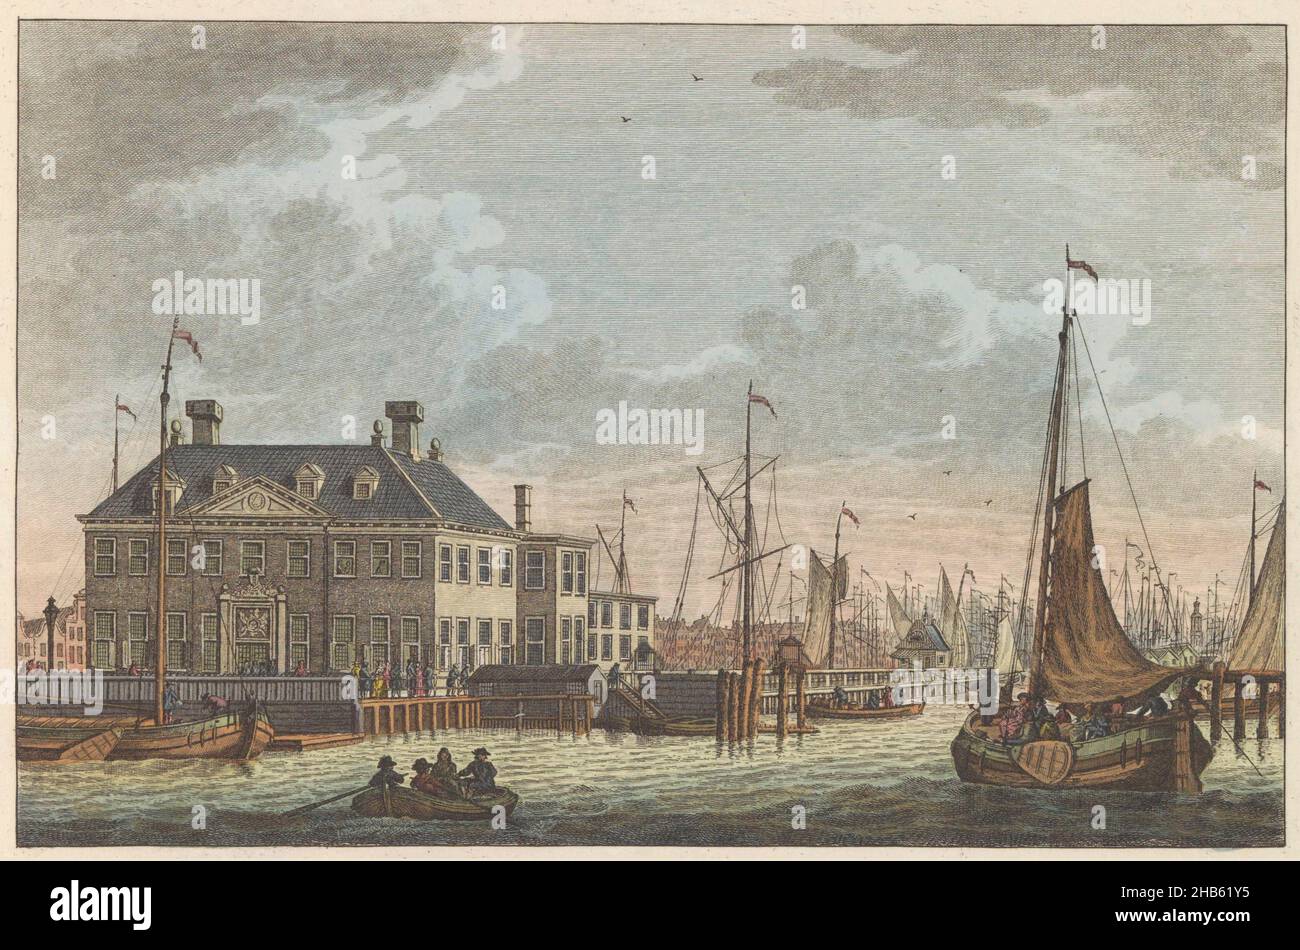 View of the Nieuwe Stadsherberg, ca. 1790, Nieuwe Stads-Herberg te Amsterdam, Vue de L'Edifice dite Nieuwe Stadsherberg - passage pour le Nord-hollande et Endroite au arrive les Barques de Buiksloot (title on object), De Nieuwe Stadsherberg te Amsterdam, ca. 1790. Part of a plate work from c. 1824-1825 with 74 (unnumbered) plates of the most important topographical views and various customs in the United Kingdom of the Netherlands., print maker: Carel Frederik Bendorp (I), intermediary draughtsman: Jan Bulthuis, Amsterdam, 1786 - 1792 and/or 1824 - 1825, paper, etching, engraving, height 174 Stock Photo